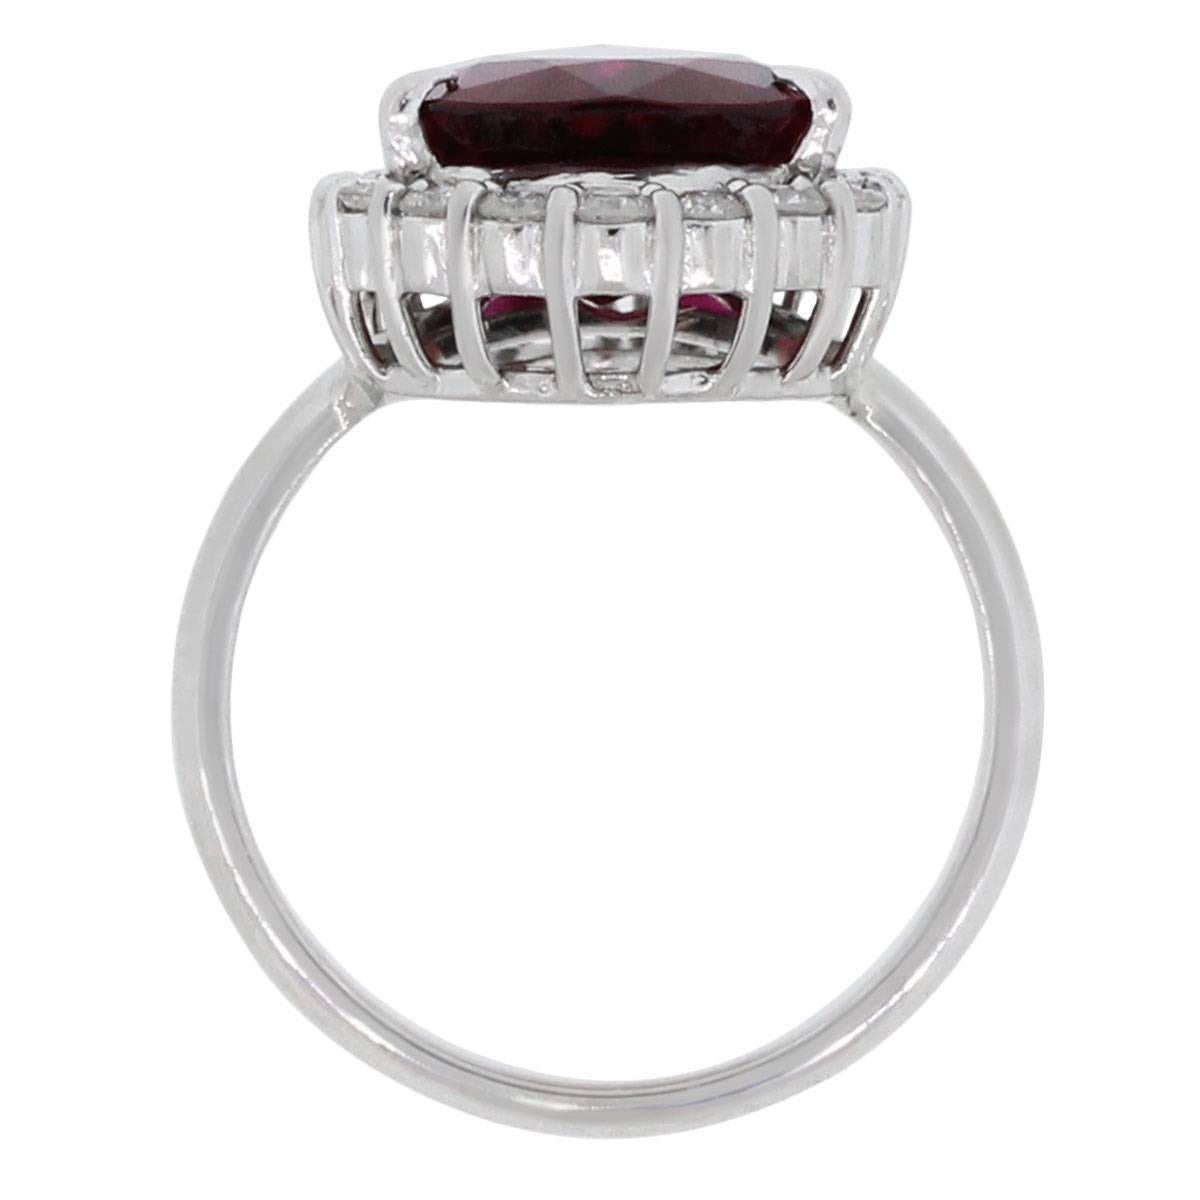 Material: Platinum
Diamond Details: Approximately 0.90ctw of Round Brilliant diamonds. Diamonds are G/H in color and VS in clarity.
Gemstone Details: Approximately 4.8ct Rubellite Center Stone measuring 13.80mm x 10.35mm
Ring Size: 5.5 (can be